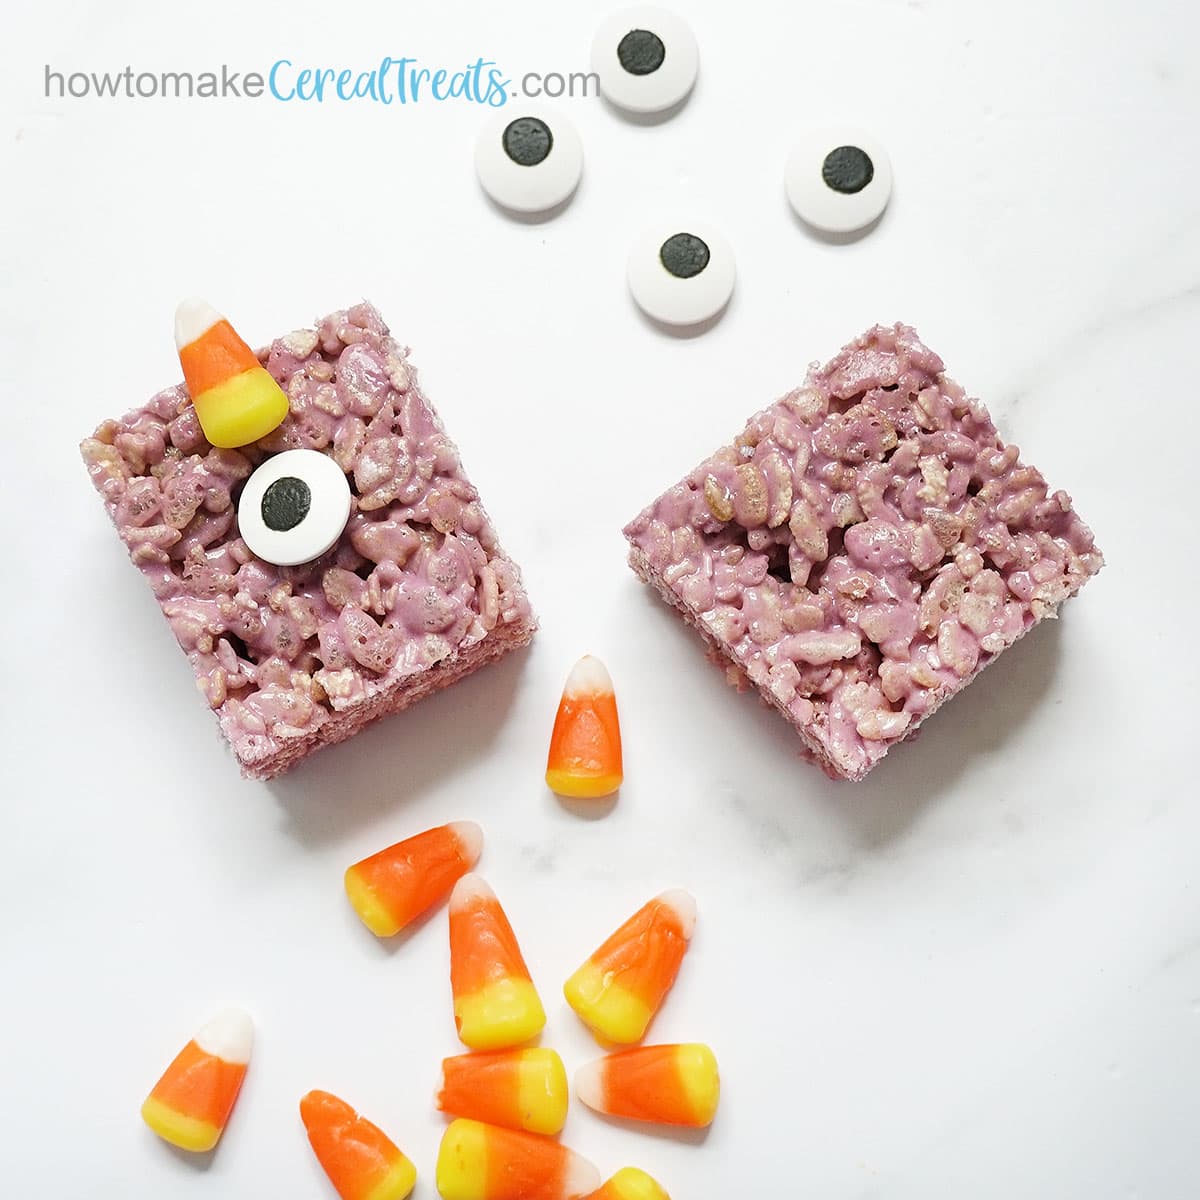 Candy corn and eye candies to decorate monster Rice Krispie Treats for Halloween